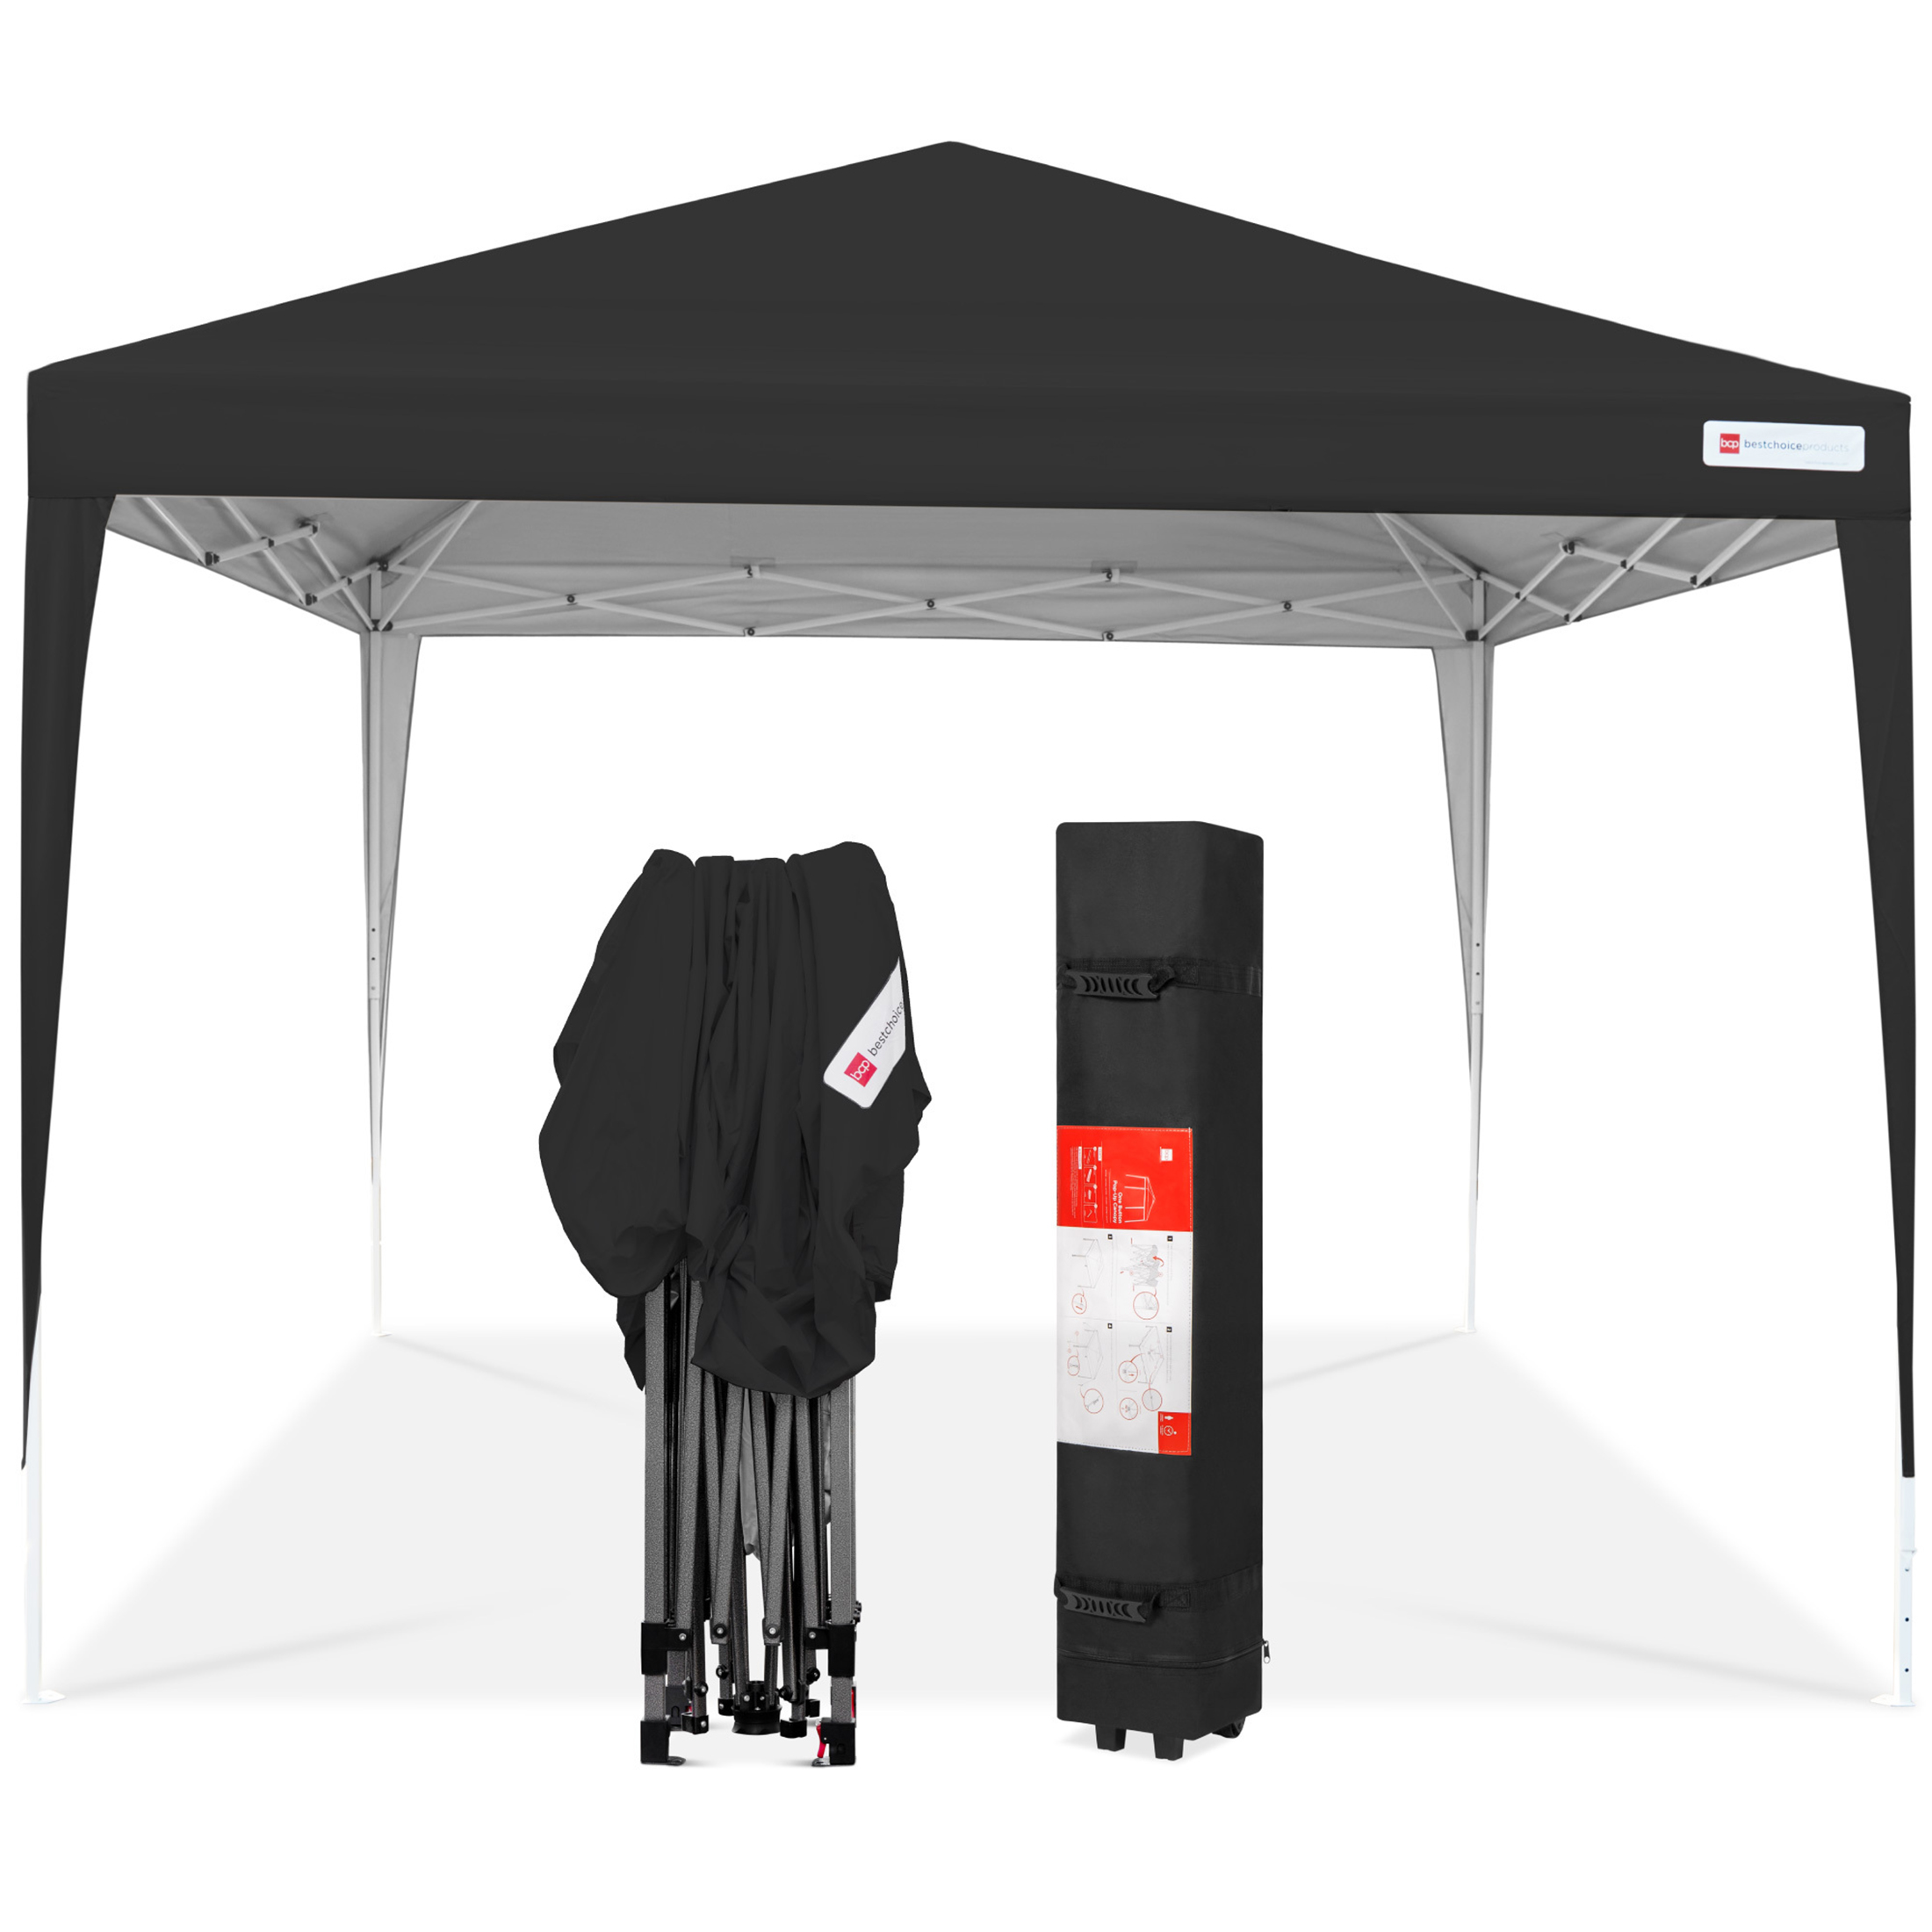 Best Choice Products 10x10ft Pop Up Canopy Outdoor Portable Adjustable Instant Gazebo Tent w/ Carrying Bag - Black - image 1 of 8